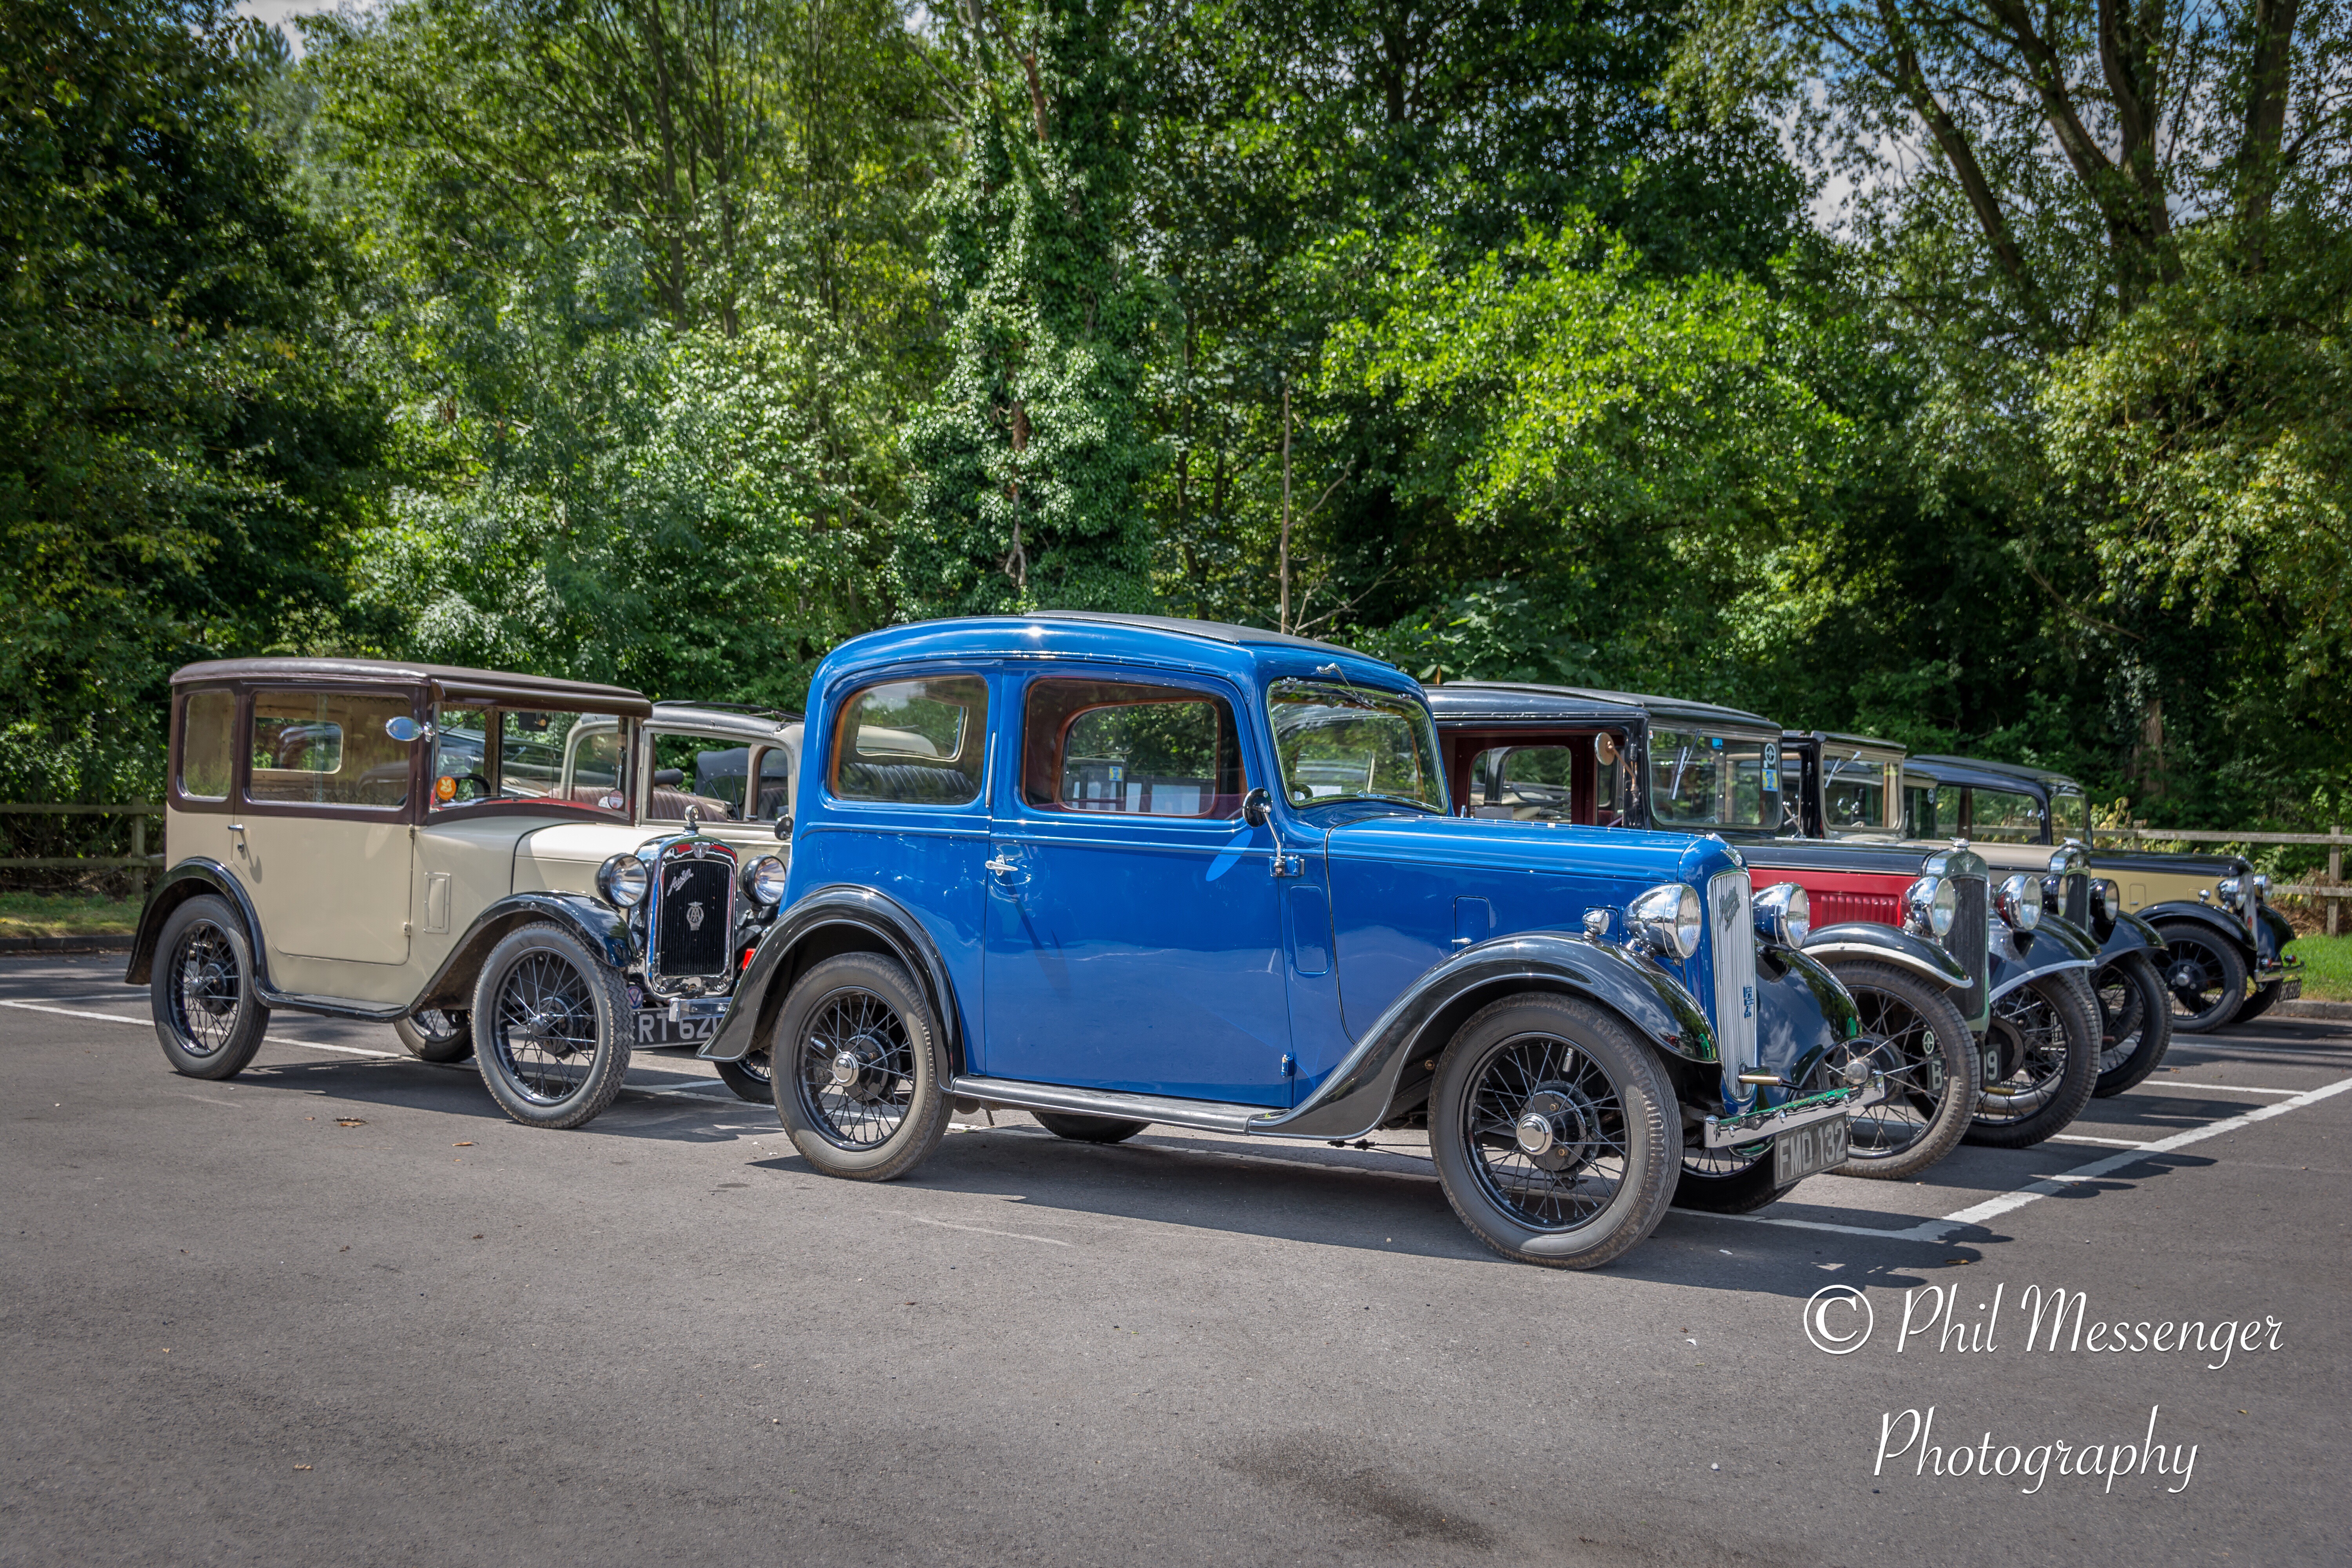 A collection of 1938 Austin sevens pictured at the Sun inn, Marlborough Road, Swindon.